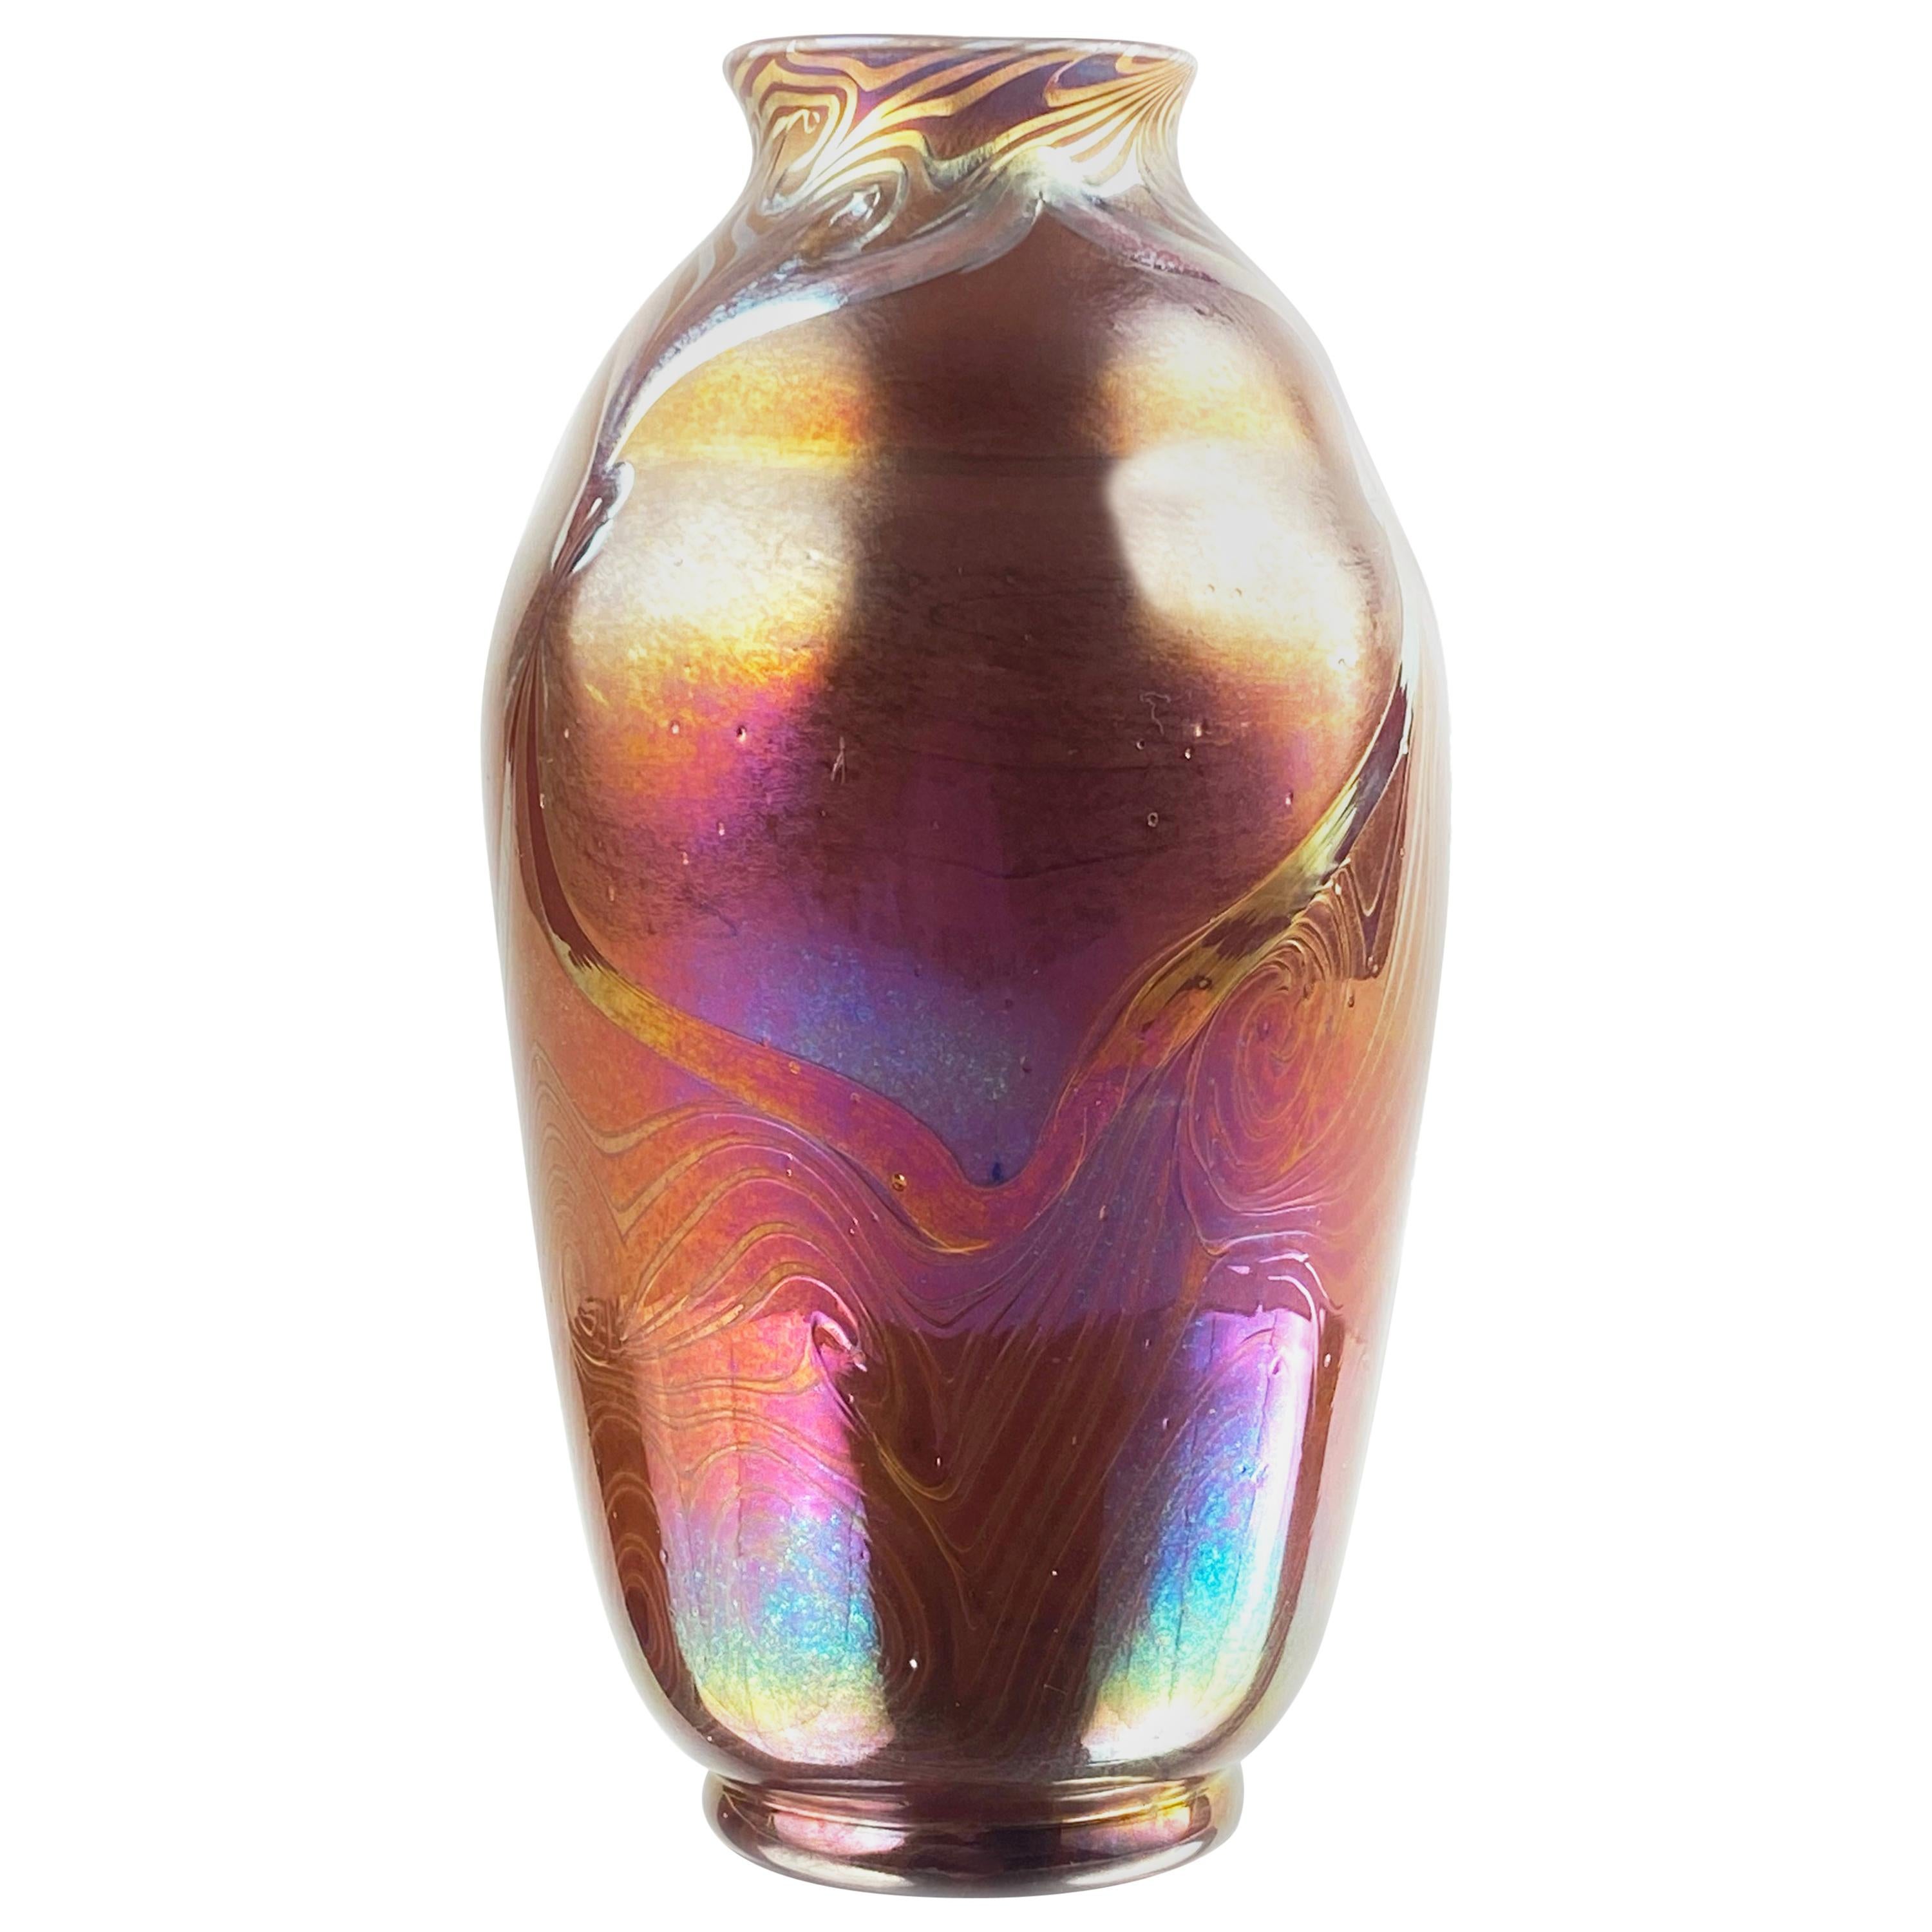 Tiffany Studios Favrile Iridescent and Reactive Decorated Art Glass Vase